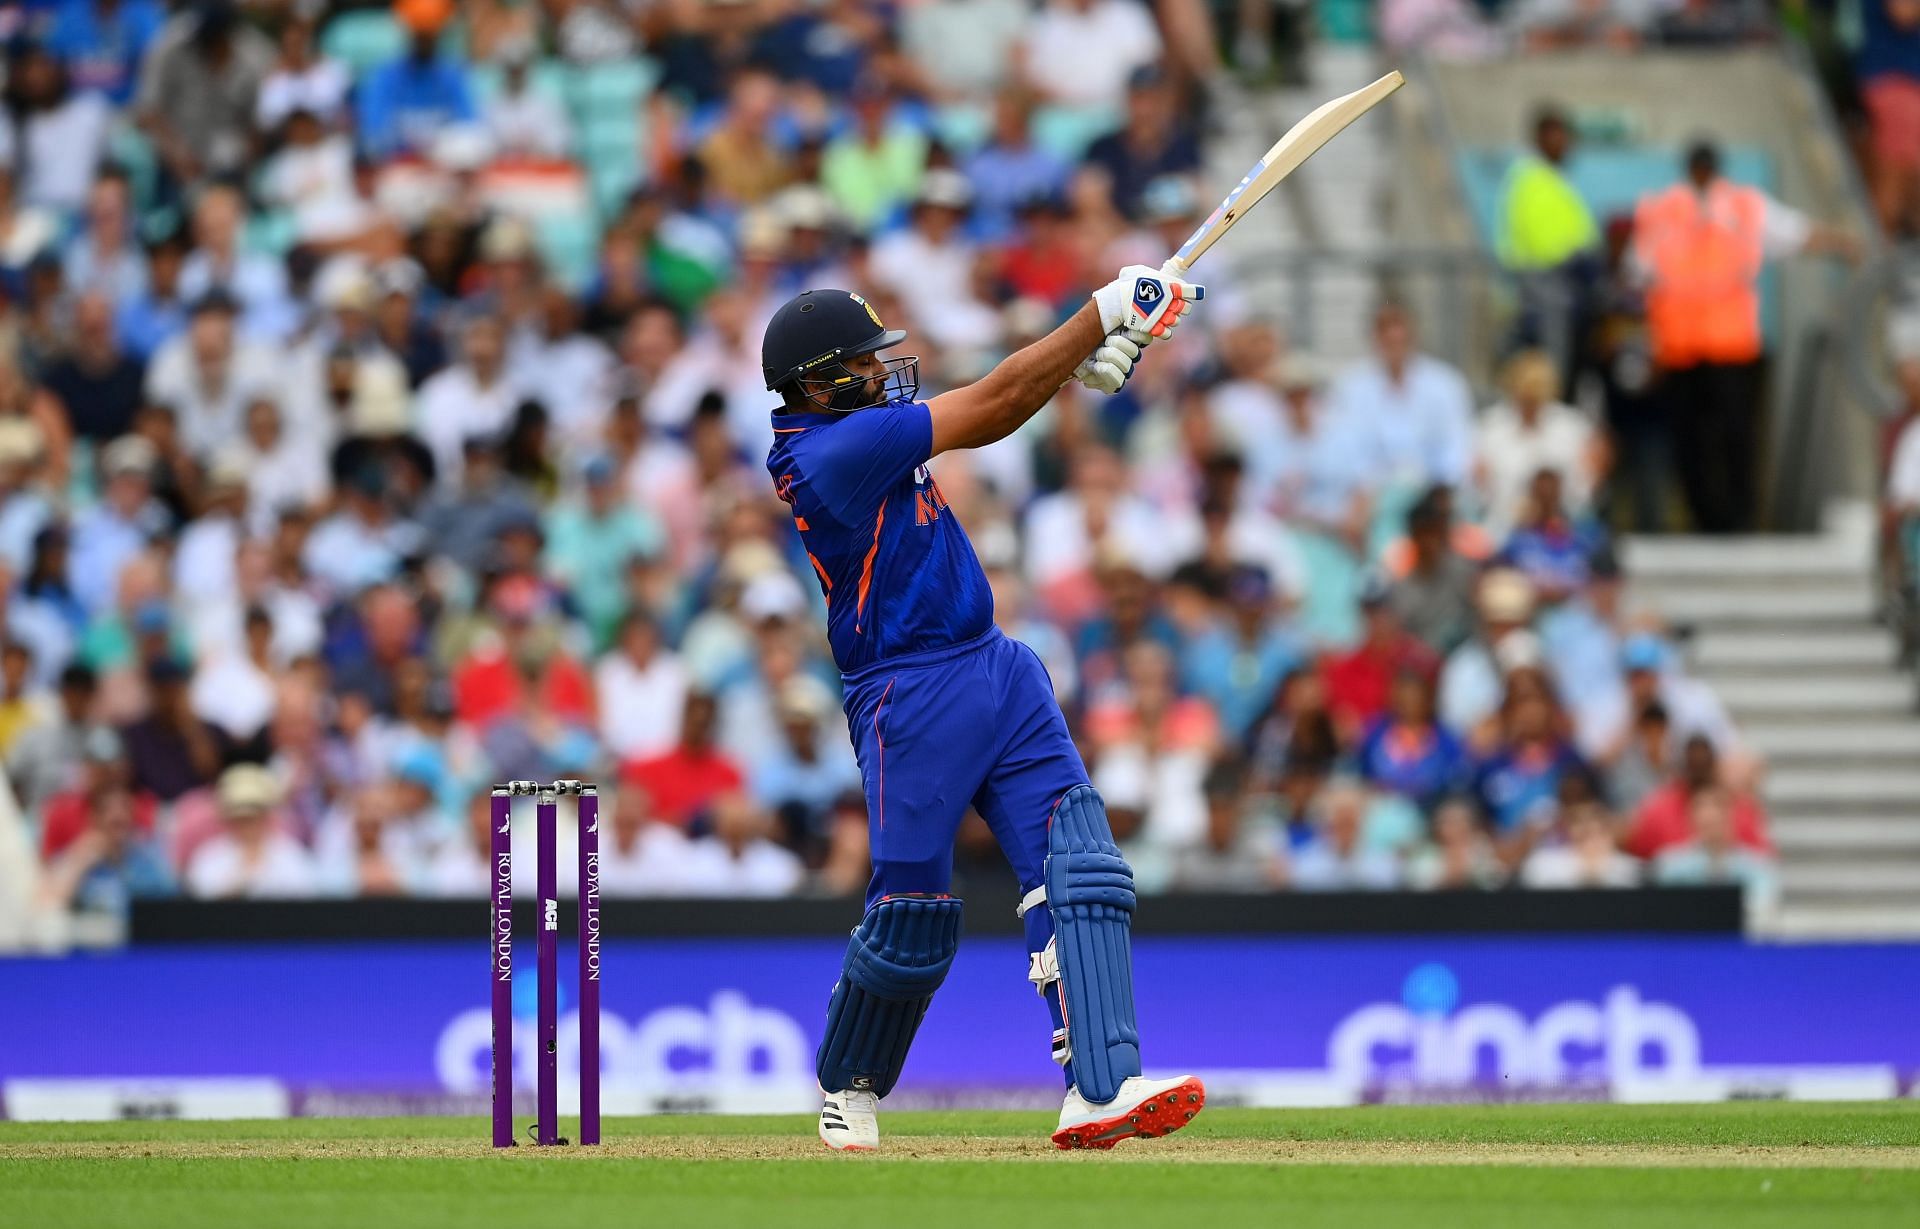 Rohit Sharma was quick to pounce on any short deliveries from the England bowlers